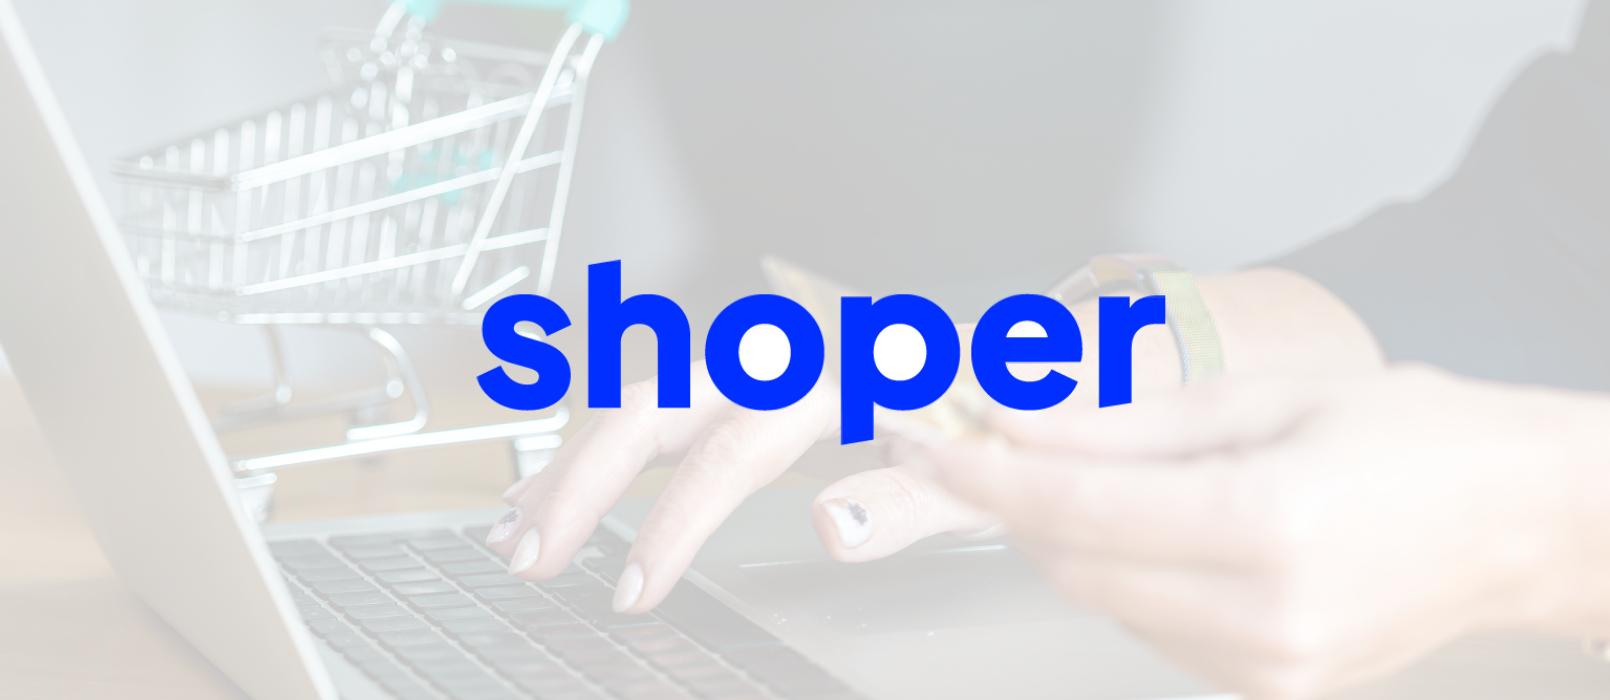 Shoper - how does it work and how to prepare an effective e-commerce store on this platform?